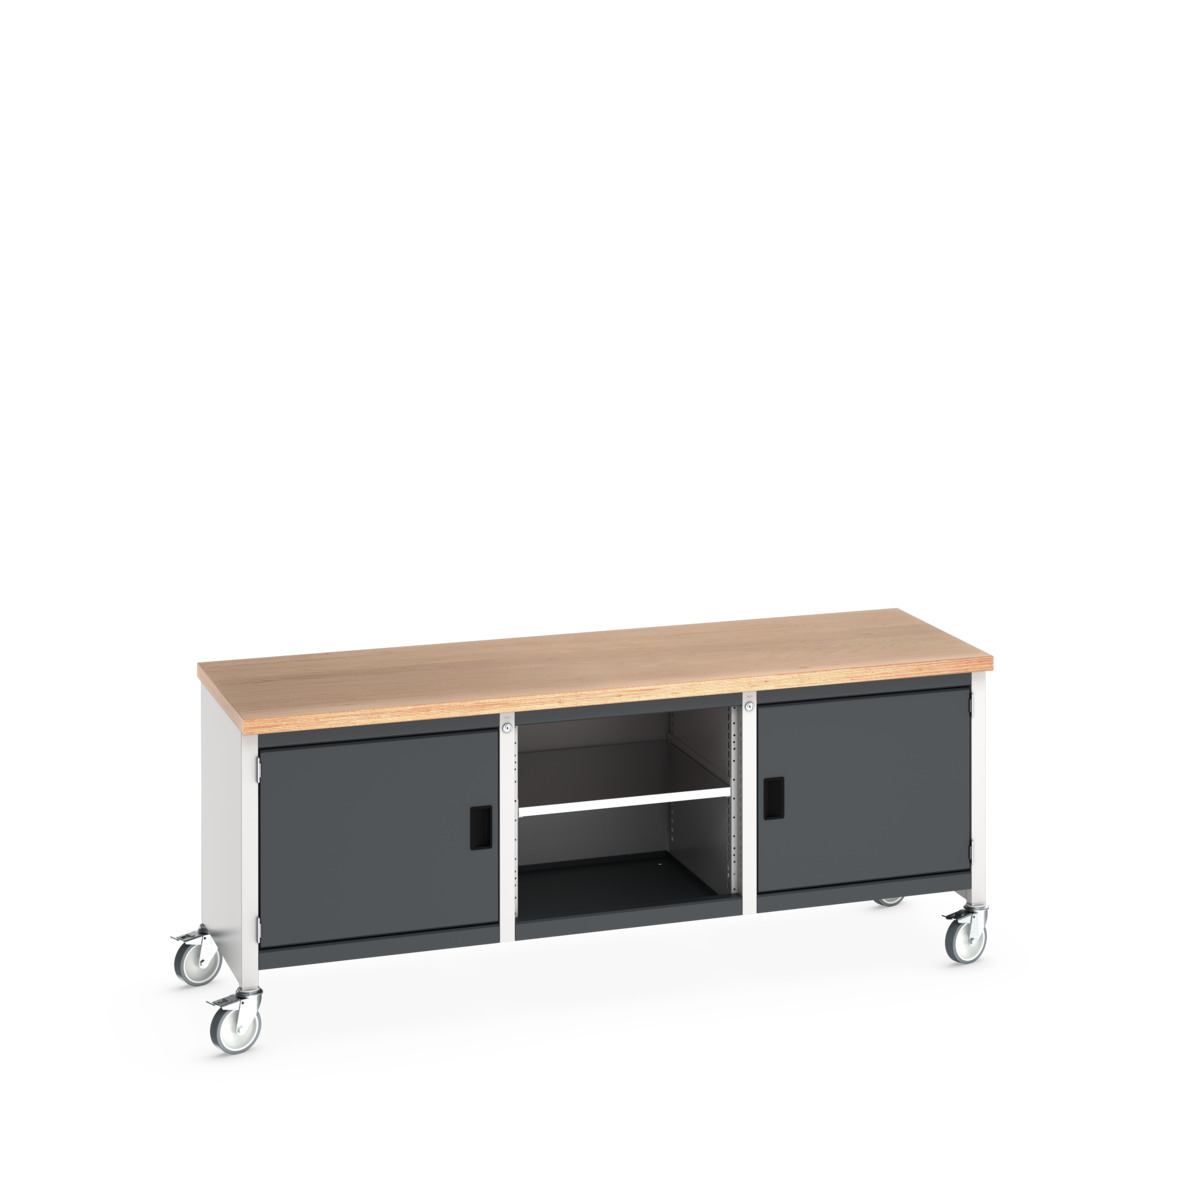 41002118.19V - cubio mobile storage bench (mpx)